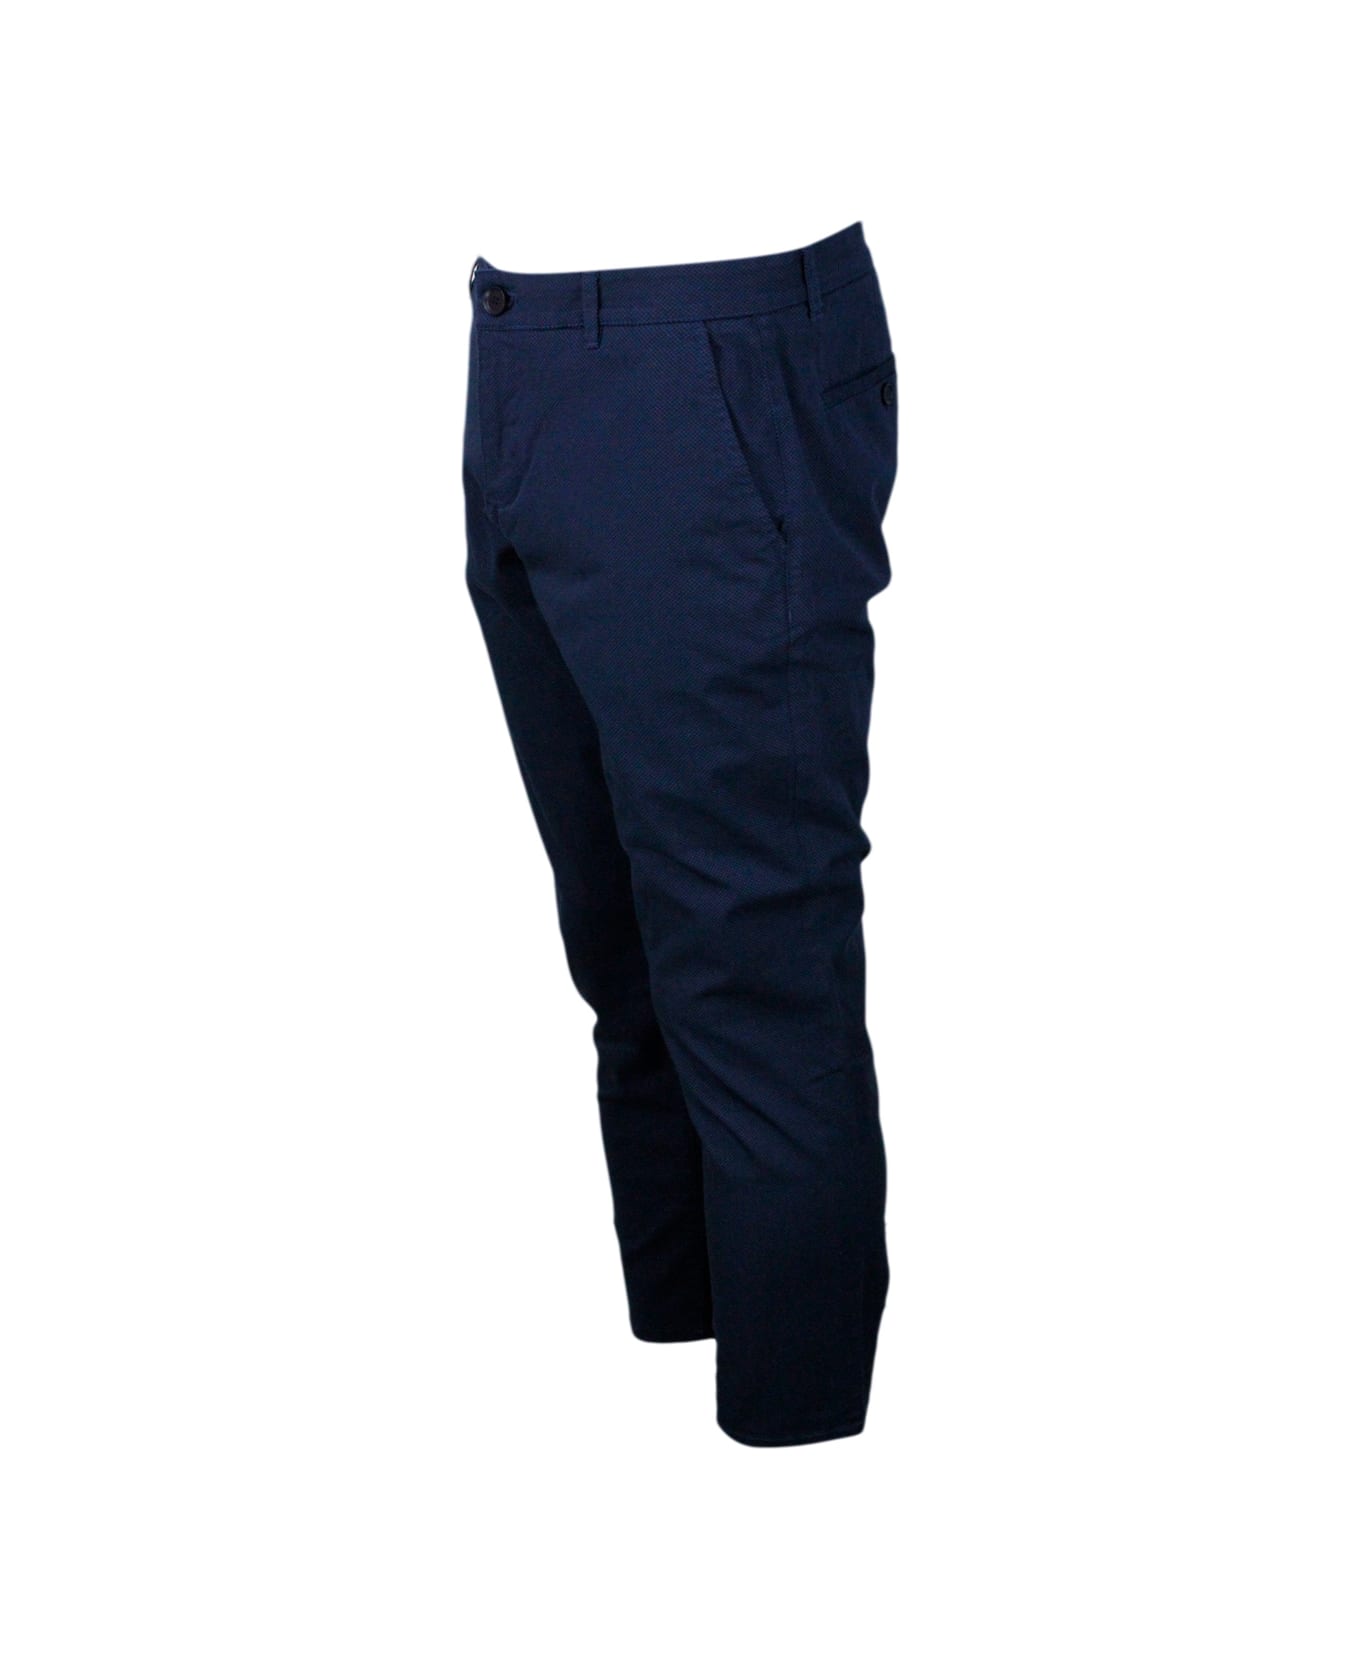 Armani Collezioni Stretch Cotton Trousers With Welt Pockets And Zip And Button Closure - Blu ボトムス